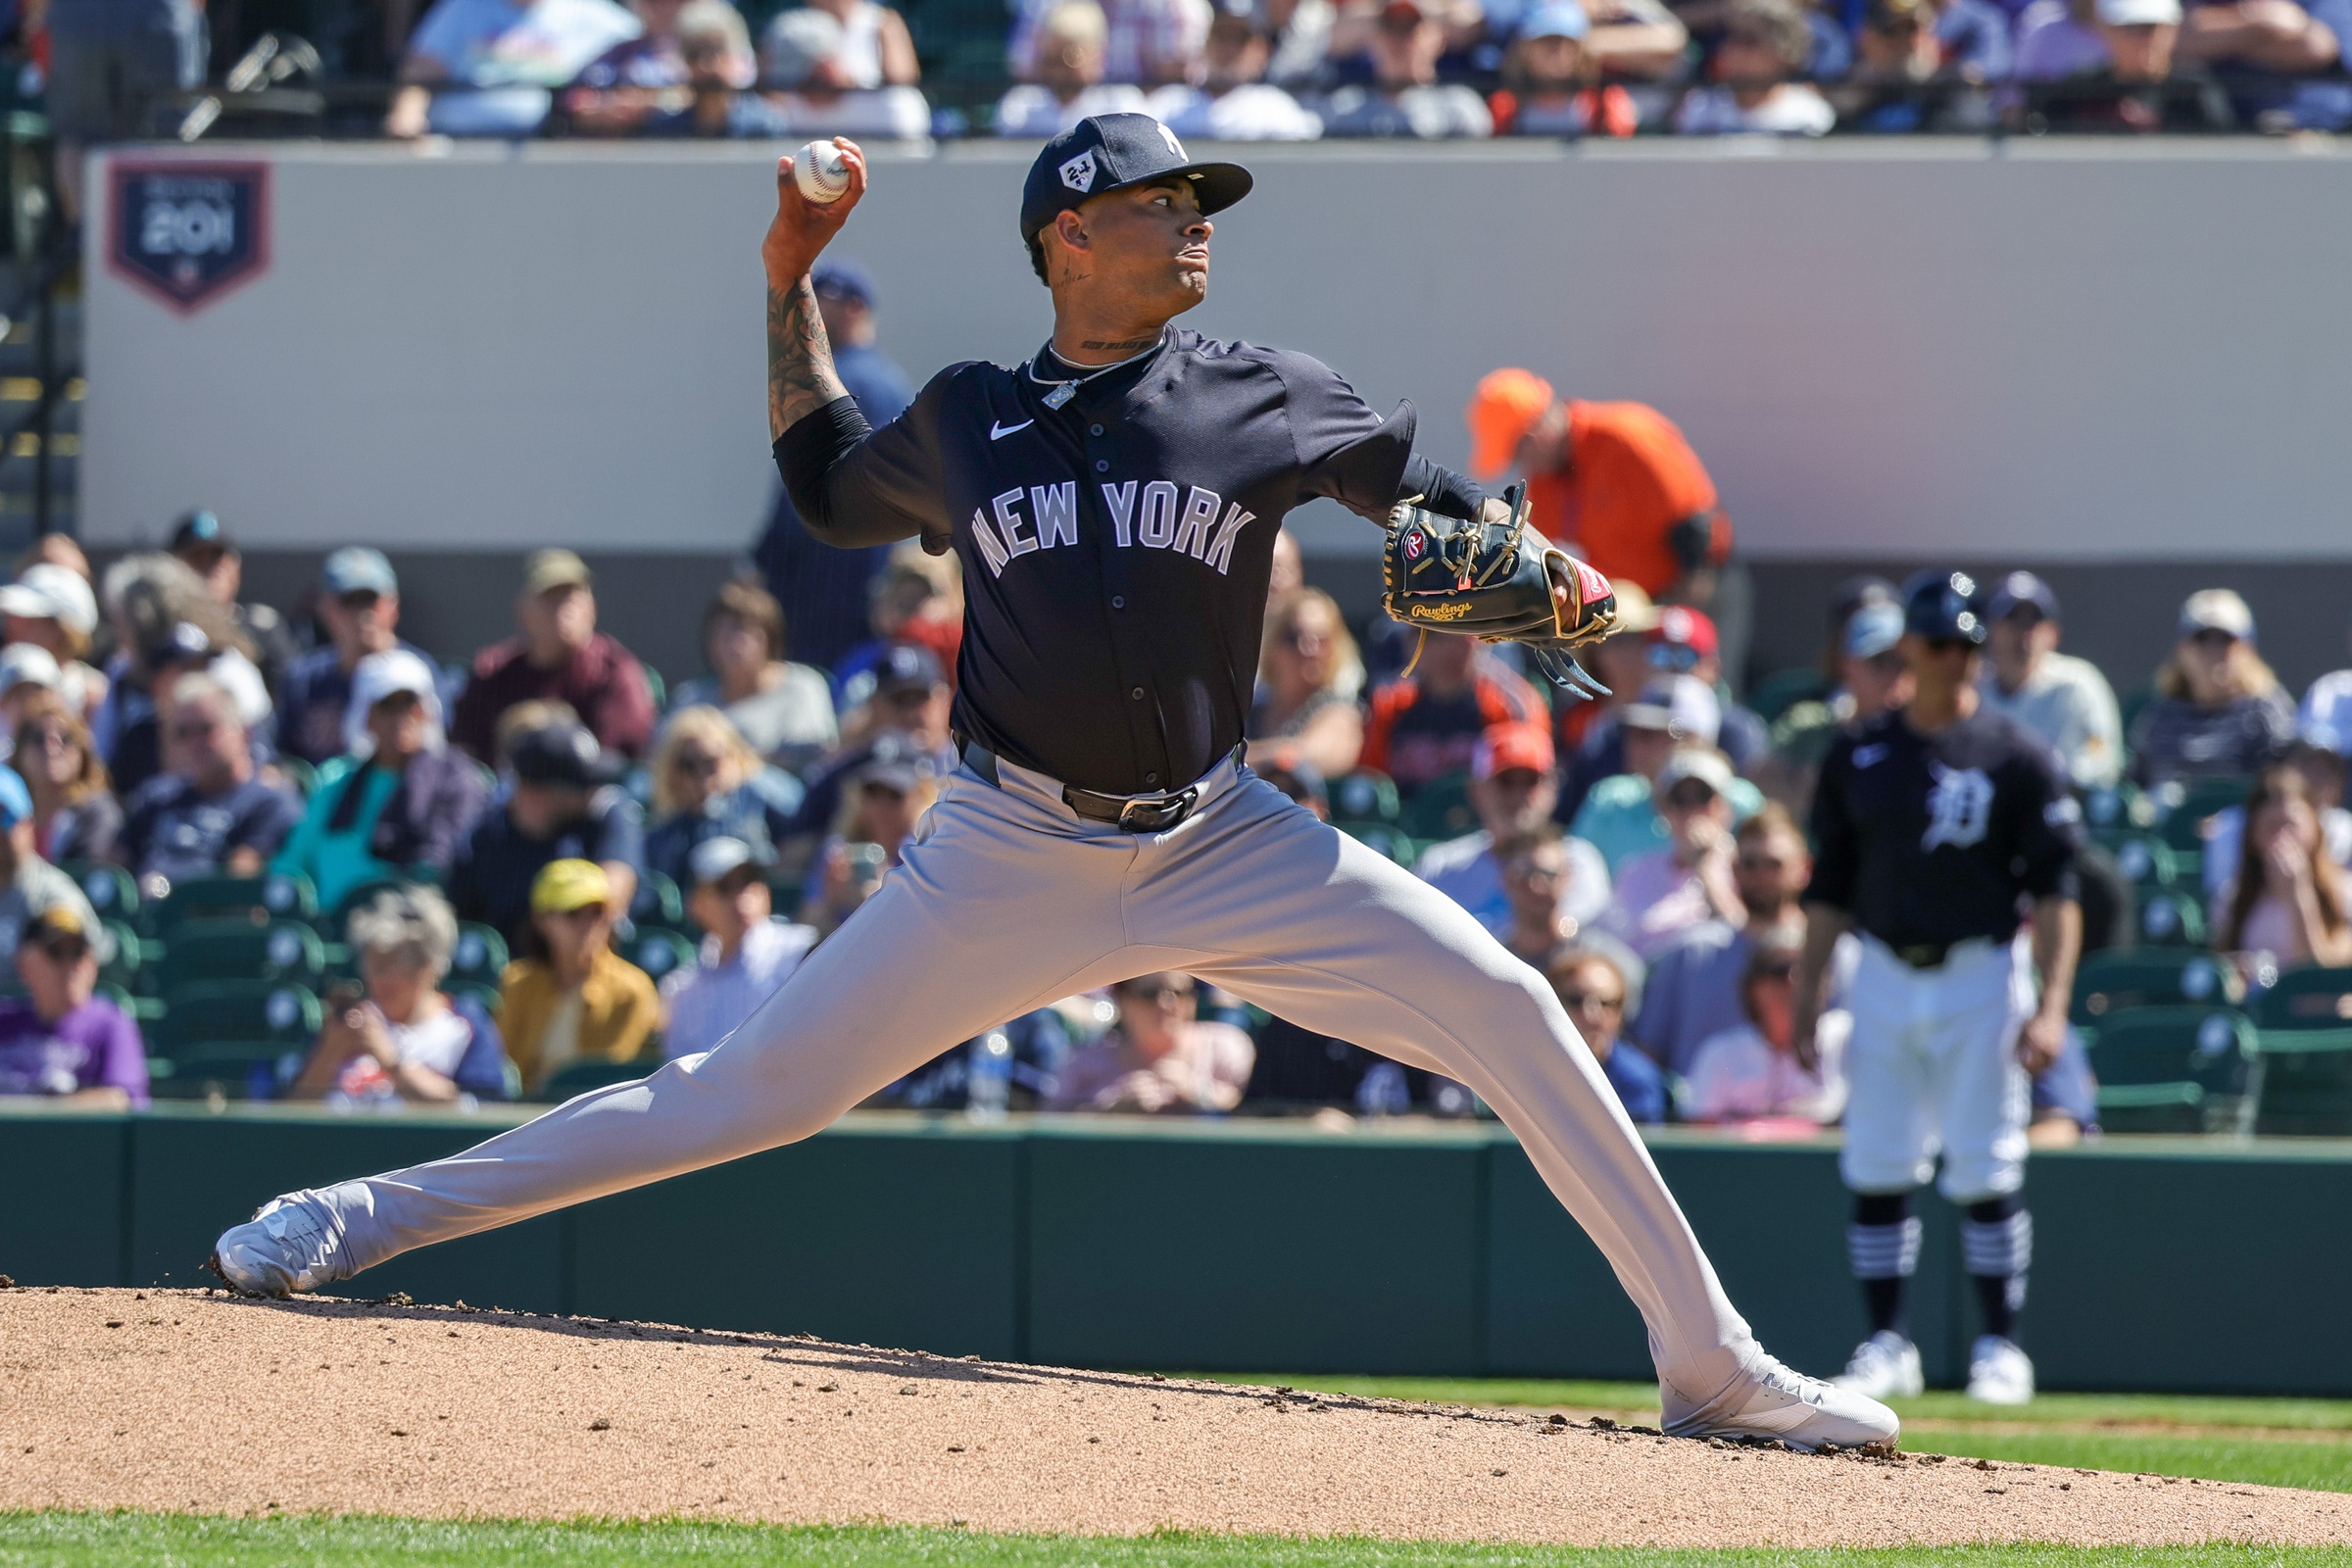 Yankees Rotation Solidified with Fifth Starter Announced